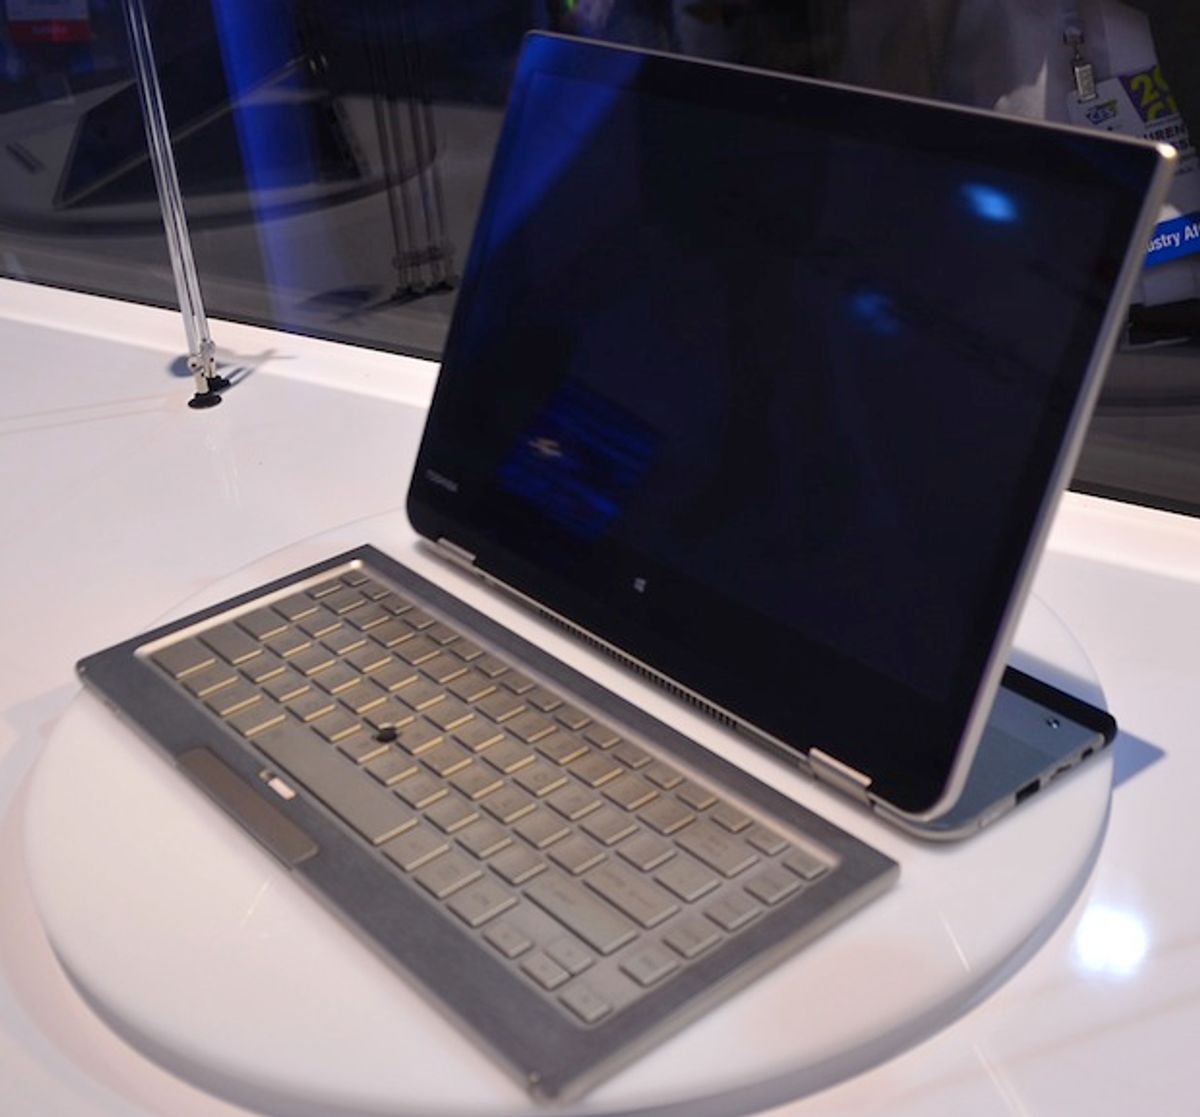 Modular Concepts at CES Hint at the Future of Mobile Computing